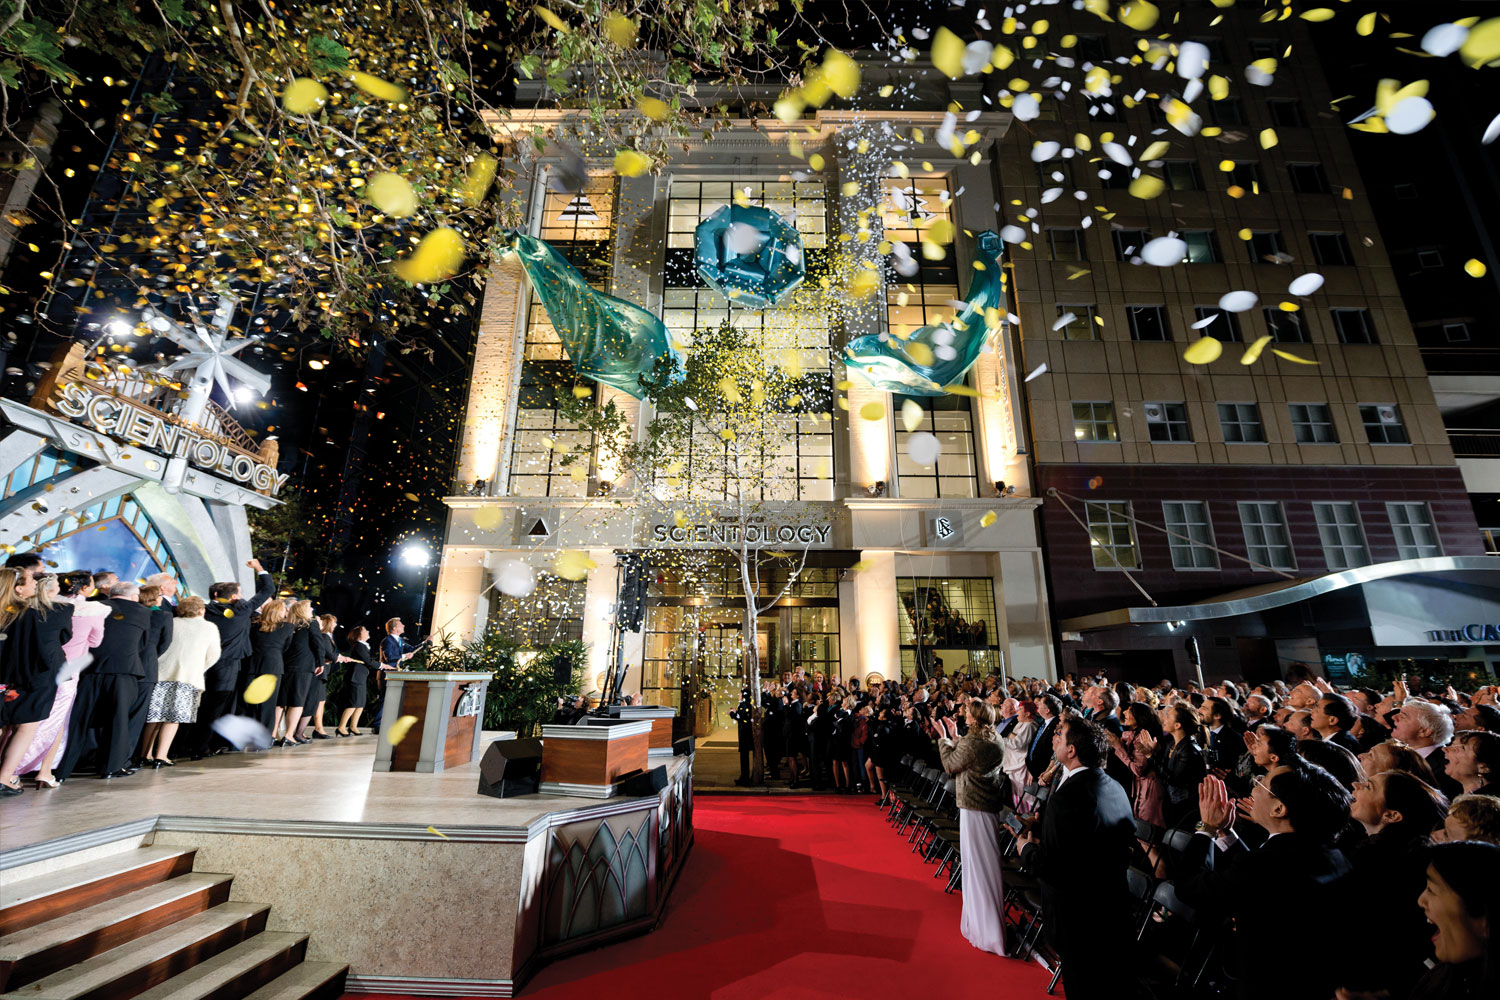 Mr. David Miscavige, Chairman of the Board Religious Technology Center, led the dedication. A Castlereagh Street filled with Scientologists from across the region greeted Mr. Miscavige.